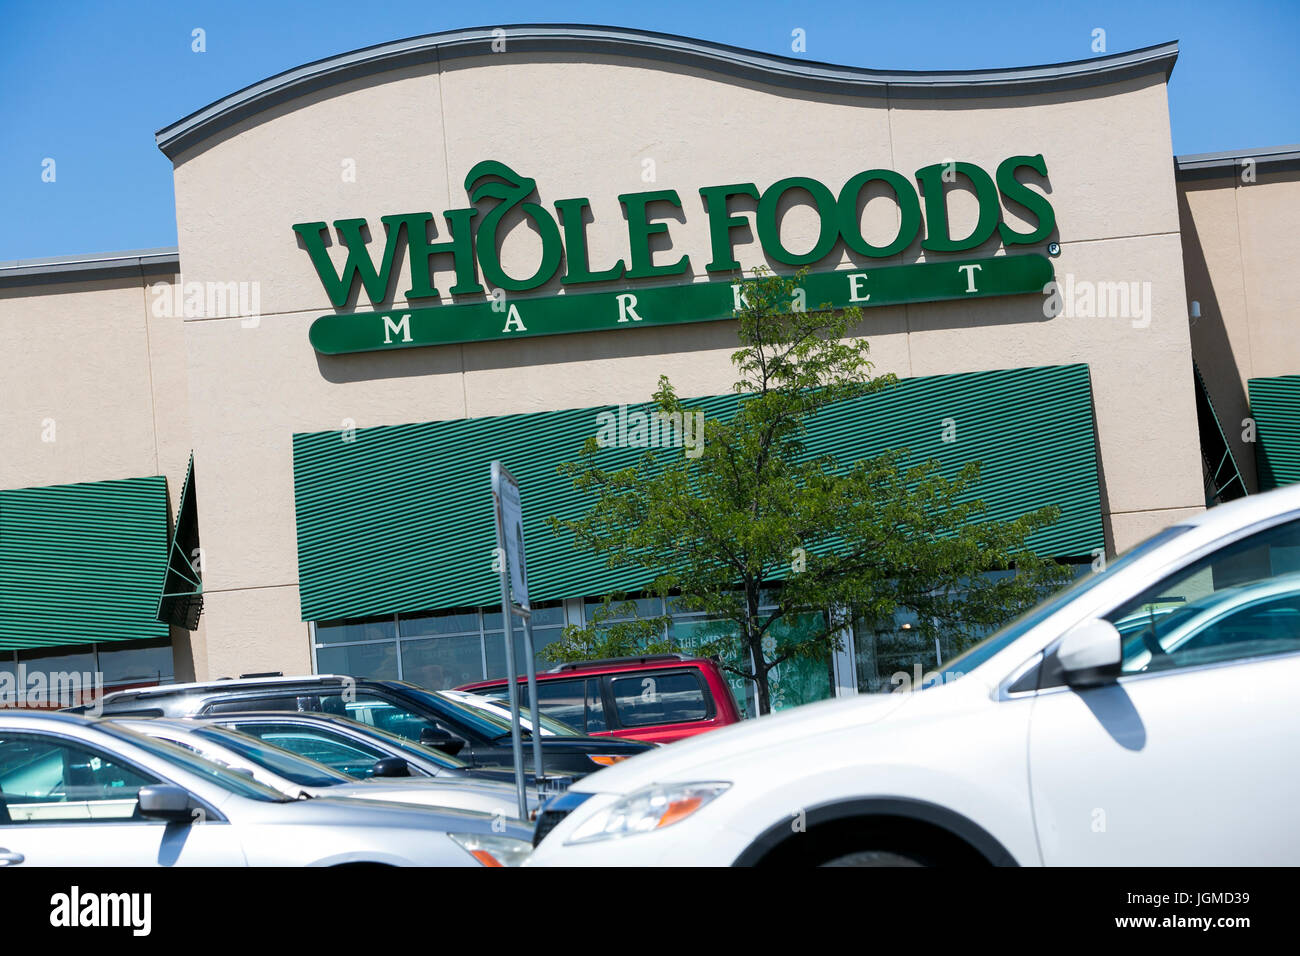 A logo sign outside of a Whole Foods retail grocery store in Mason, Ohio on July 2, 2017. Stock Photo